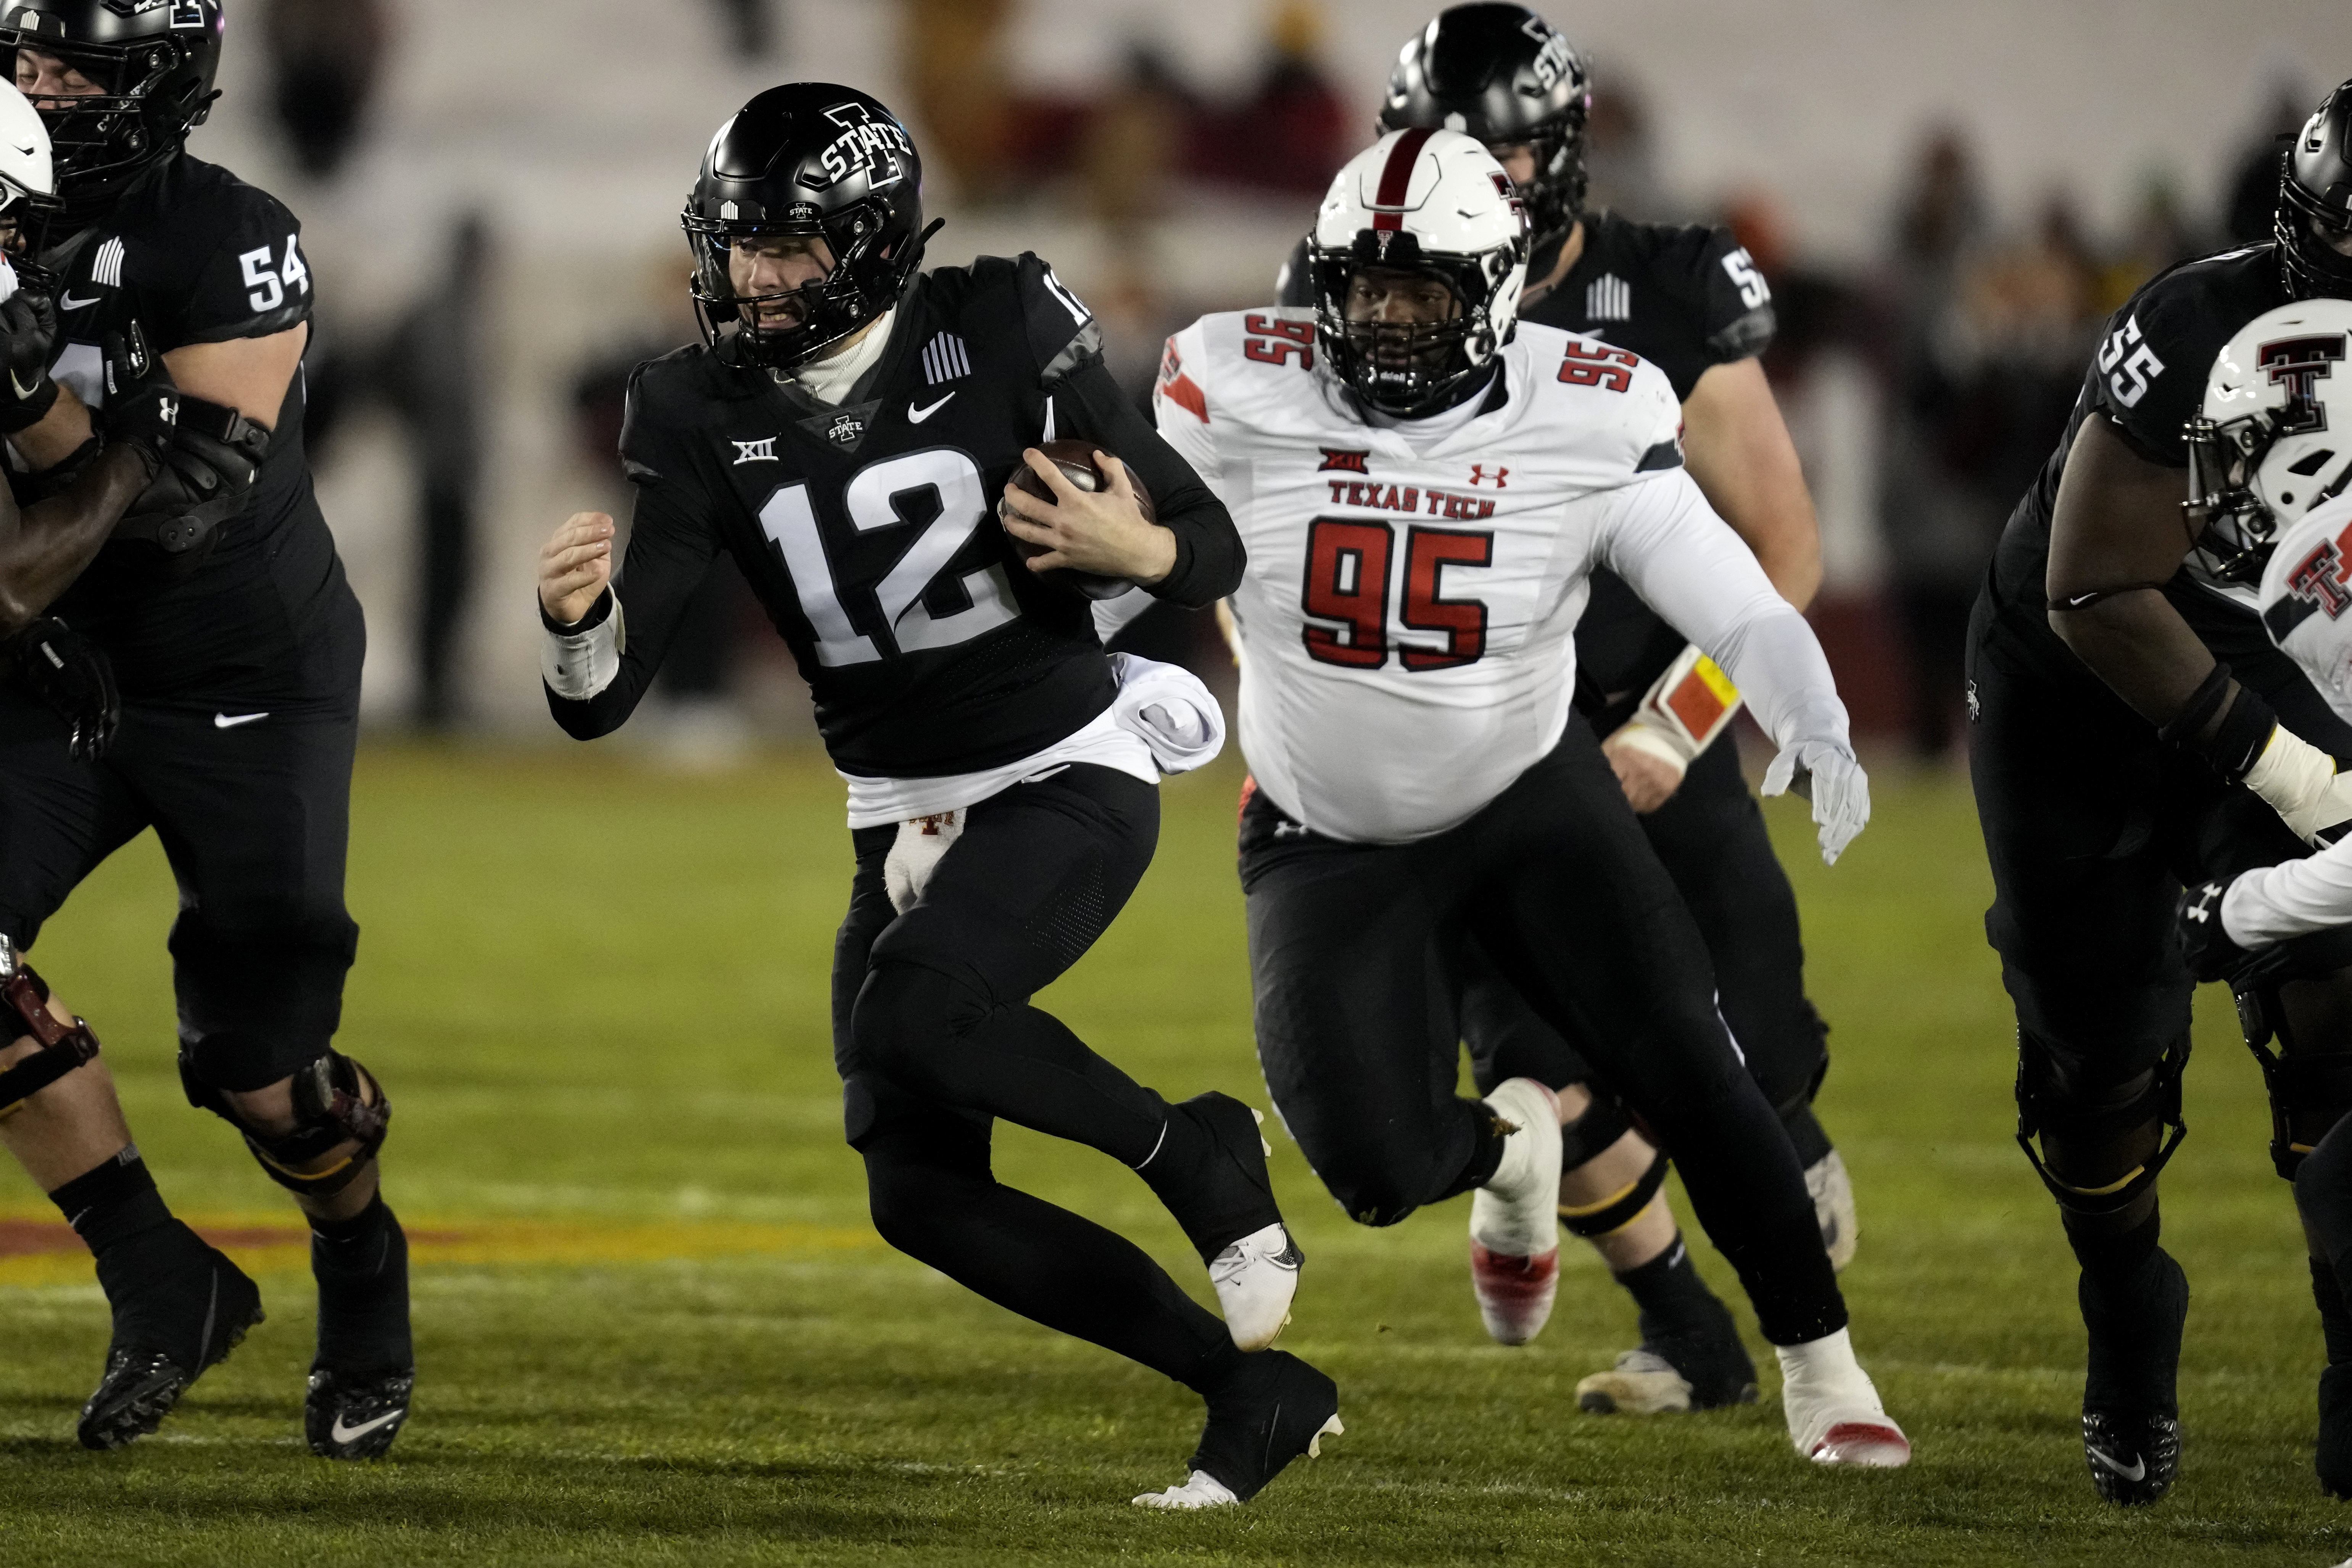 Texas Tech vs. Iowa State: What to Know For Saturday